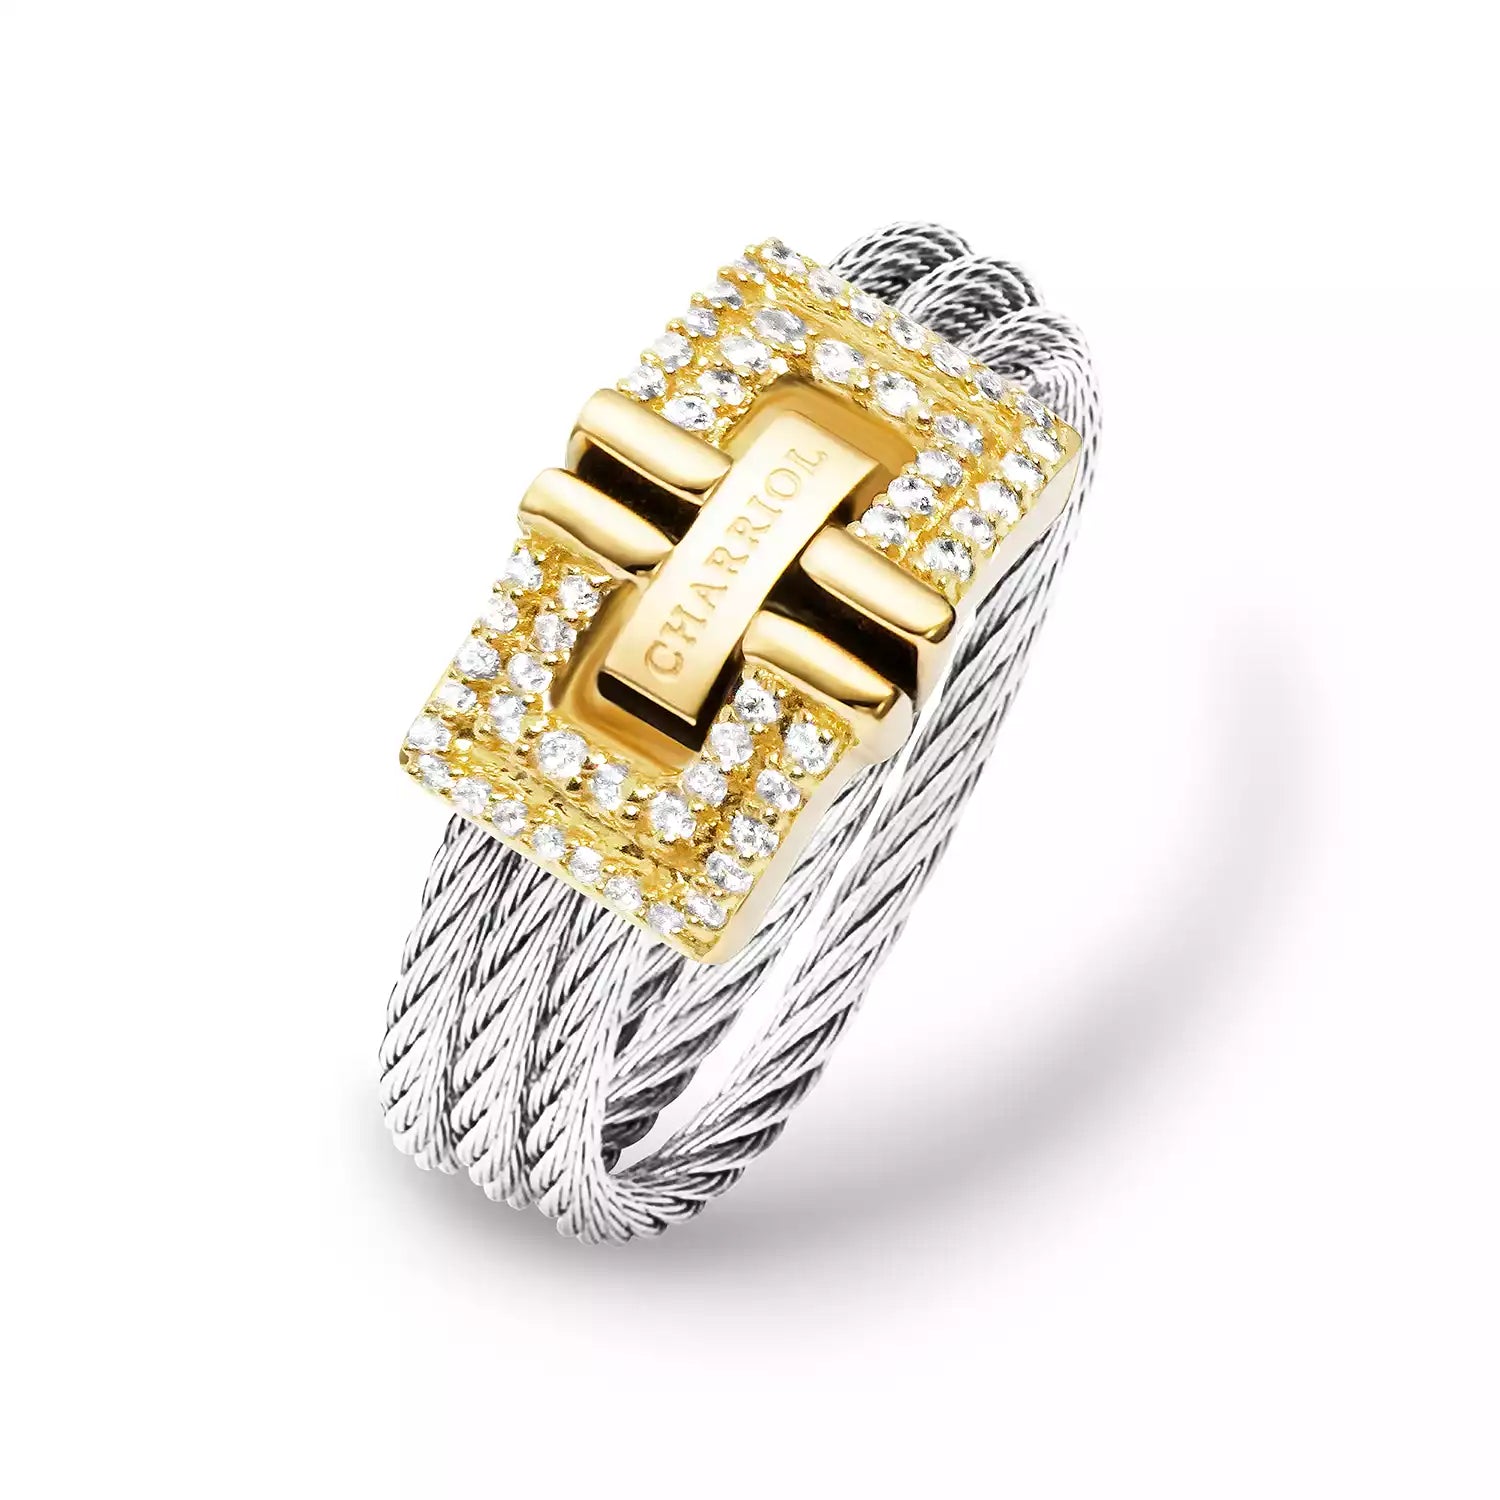 Steel_Gold 18KT with 54 Diamonds 0.21ct